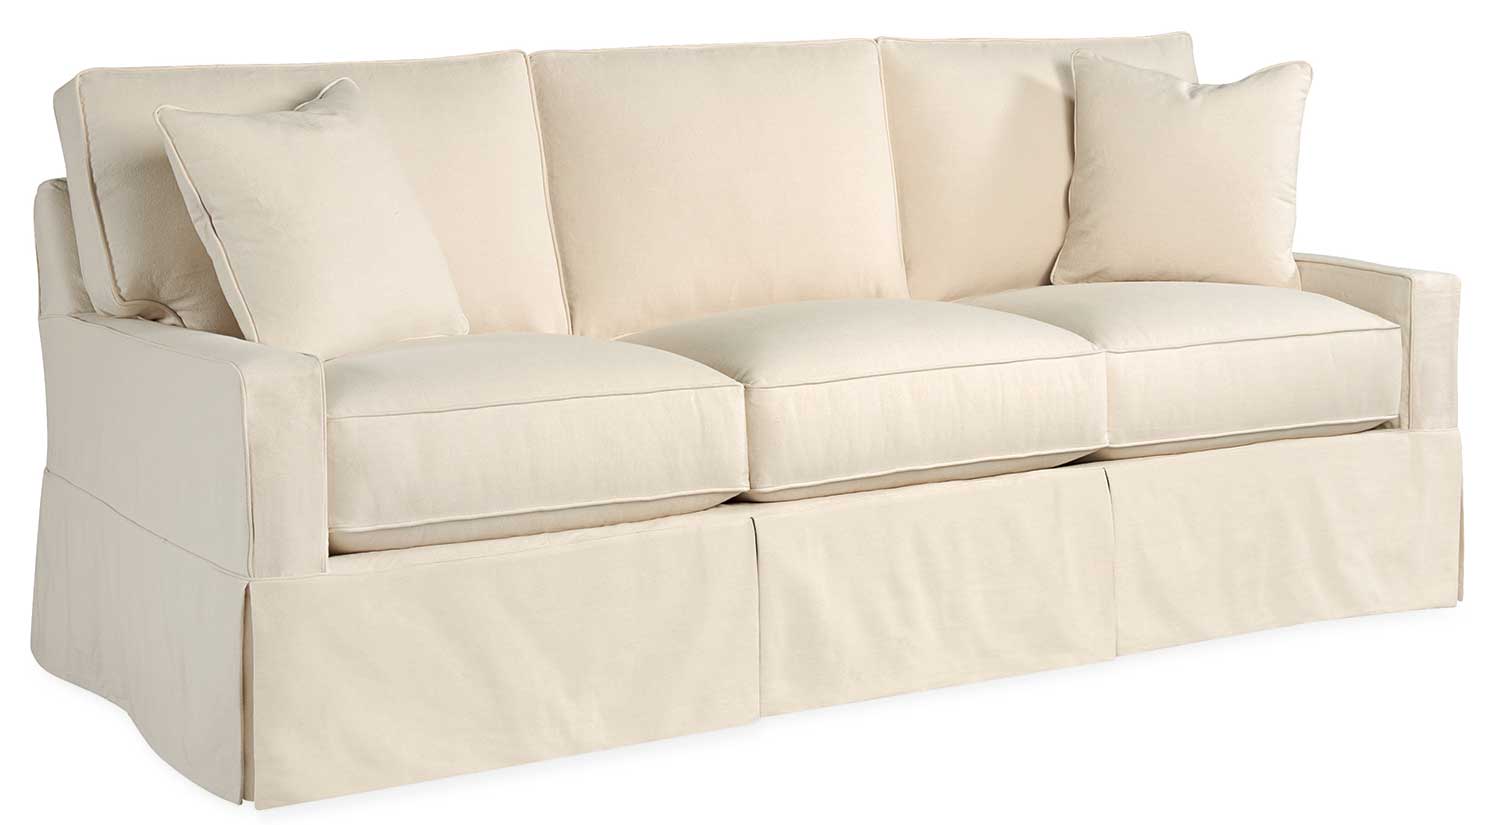 sofa bed slipcover pattern